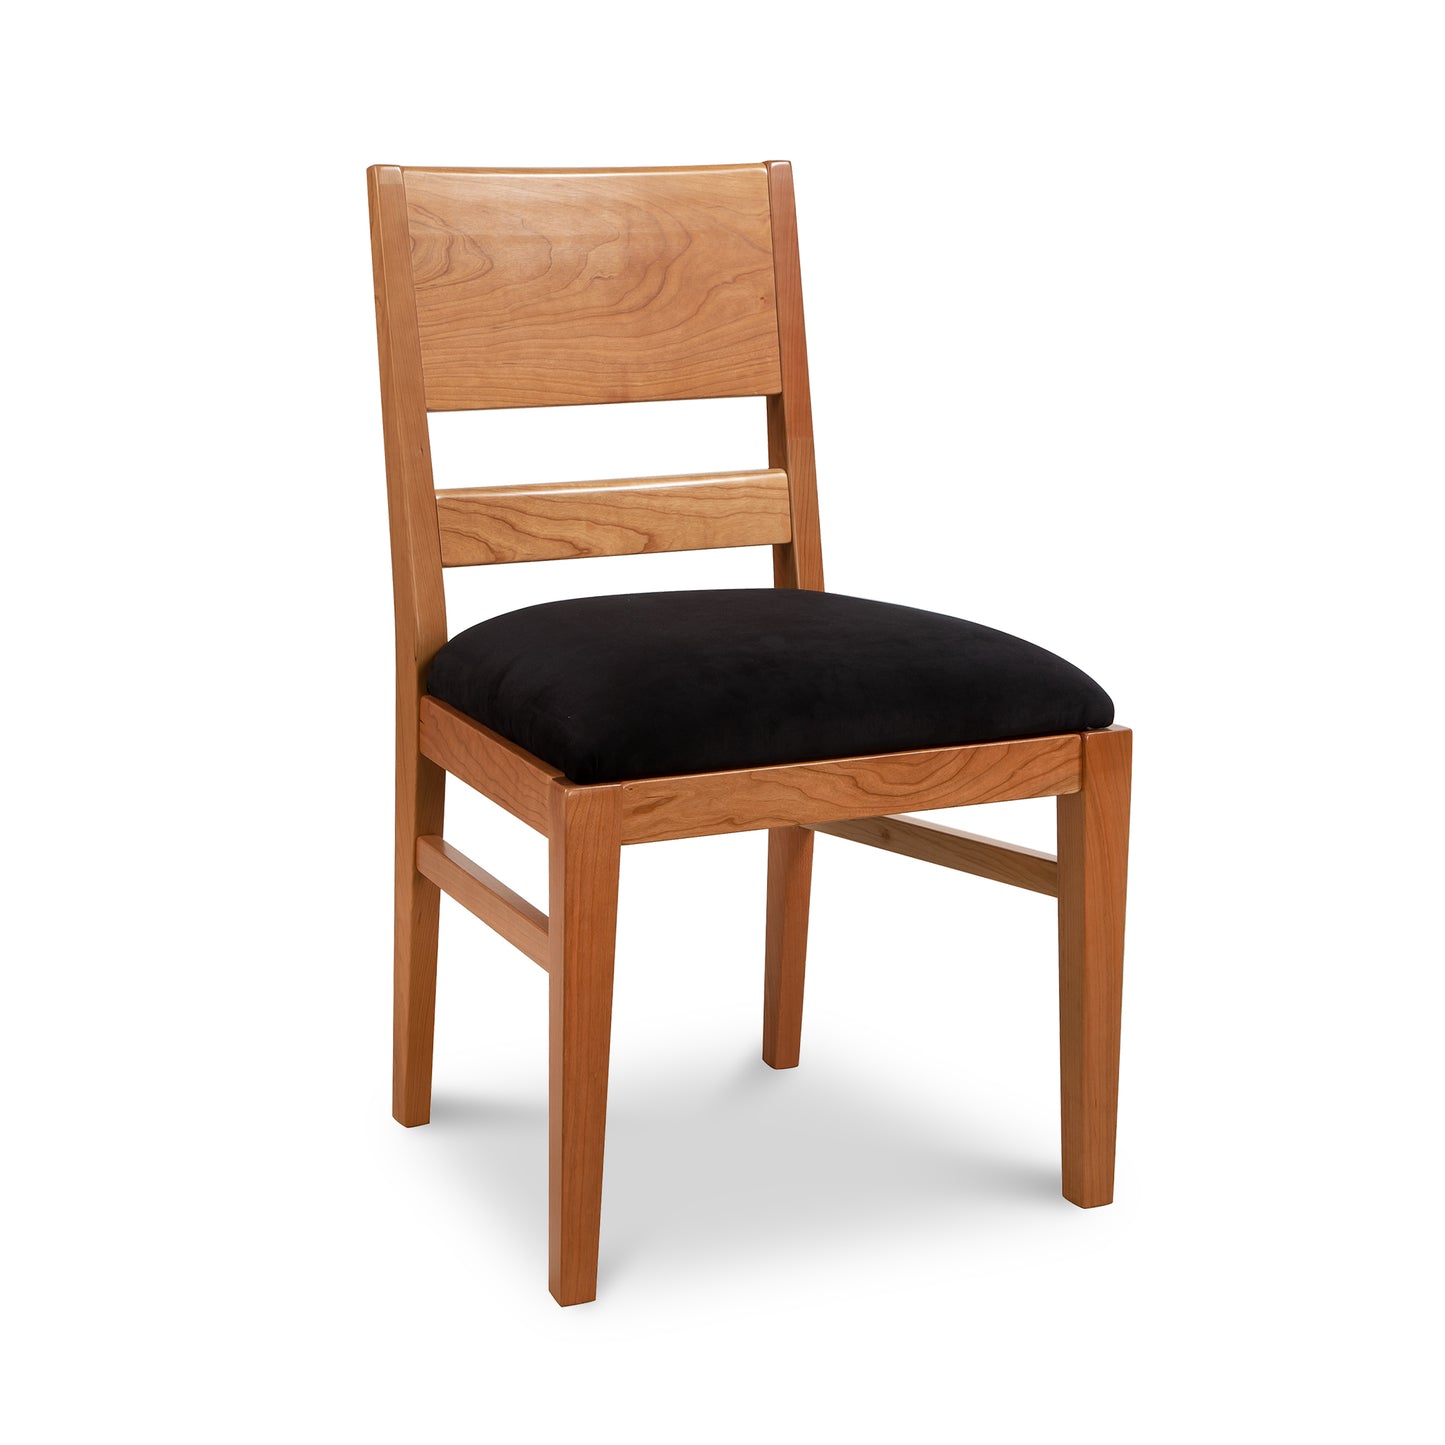 A wooden dining chair with black upholstered seat.